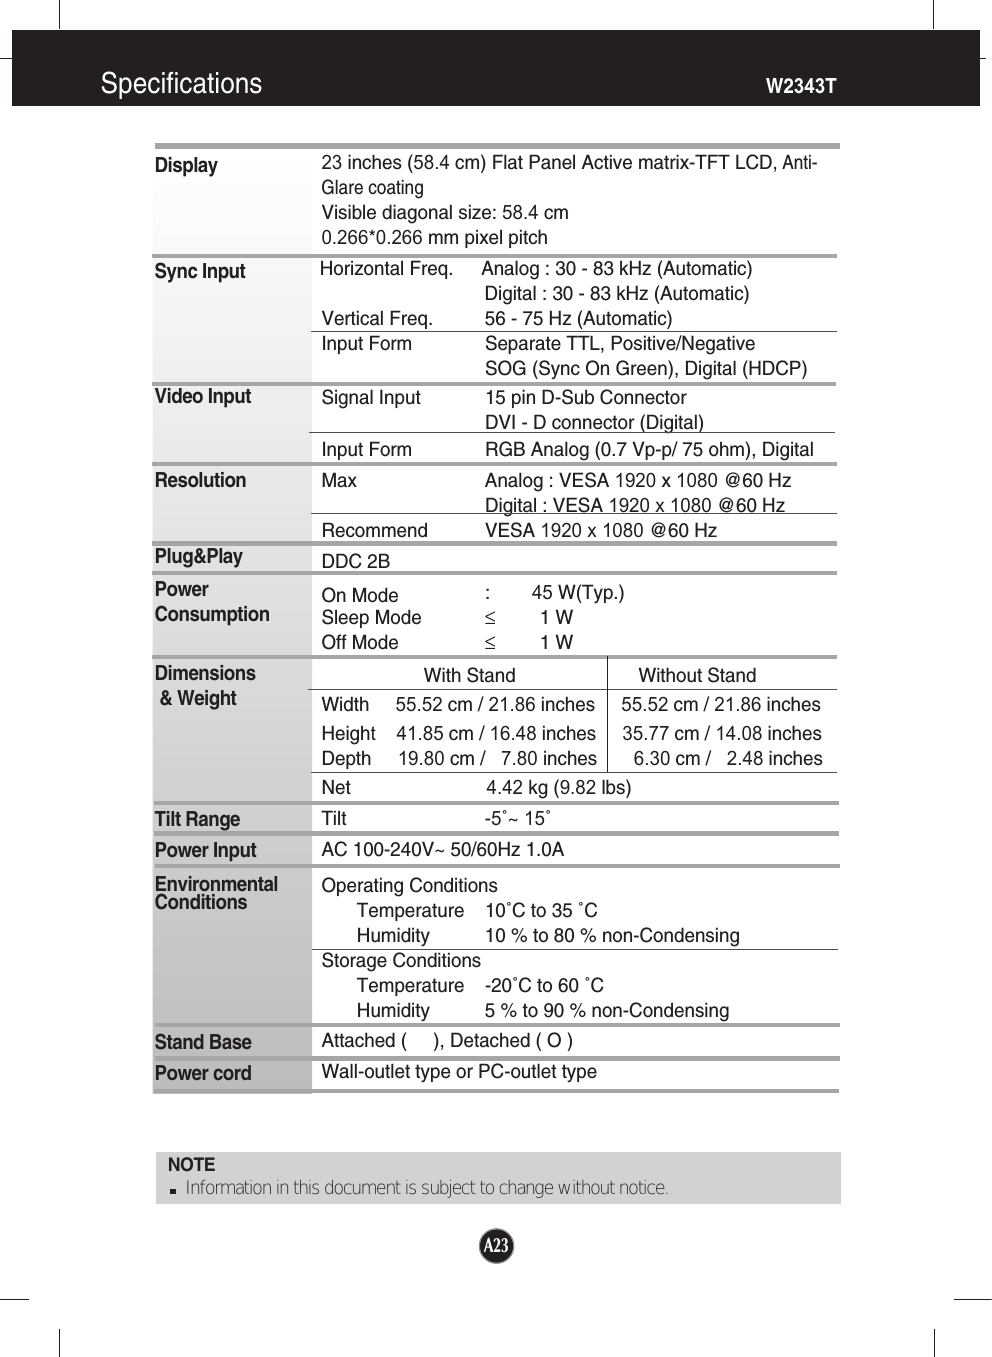 Specifications                                                                     W2343TNOTEInformation in this document is subject to change without notice.DisplaySync InputVideo InputResolutionPlug&amp;PlayPowerConsumptionDimensions&amp; WeightTilt RangePower InputEnvironmentalConditionsStand Base Power cord 23 inches (58.4 cm) Flat Panel Active matrix-TFT LCD, Anti-Glare coatingVisible diagonal size: 58.4 cm0.266*0.266 mm pixel pitchHorizontal Freq. Analog : 30 - 83 kHz (Automatic)Digital : 30 - 83 kHz (Automatic)Vertical Freq. 56 - 75 Hz (Automatic)Input Form Separate TTL, Positive/NegativeSOG (Sync On Green), Digital (HDCP)Signal Input 15 pin D-Sub ConnectorDVI - D connector (Digital)Input Form RGB Analog (0.7 Vp-p/ 75 ohm), DigitalMax Analog : VESA 1920 x 1080 @60 HzDigital : VESA 1920 x 1080 @60 HzRecommend VESA 1920 x 1080 @60 HzDDC 2B   On Mode :        45 W(Typ.)Sleep Mode ≤1 WOff Mode ≤1 WWith Stand Without StandWidth     55.52 cm / 21.86 inches     55.52 cm / 21.86 inchesHeight    41.85 cm / 16.48 inches     35.77 cm / 14.08 inches Depth     19.80 cm /   7.80 inches       6.30 cm /   2.48 inchesNet                          4.42 kg (9.82 lbs)Tilt -5˚~ 15˚AC 100-240V~ 50/60Hz 1.0A Operating ConditionsTemperature 10˚C to 35 ˚CHumidity 10 % to 80 % non-CondensingStorage ConditionsTemperature -20˚C to 60 ˚C Humidity 5 % to 90 % non-CondensingAttached (     ), Detached ( O )Wall-outlet type or PC-outlet typeA23A23